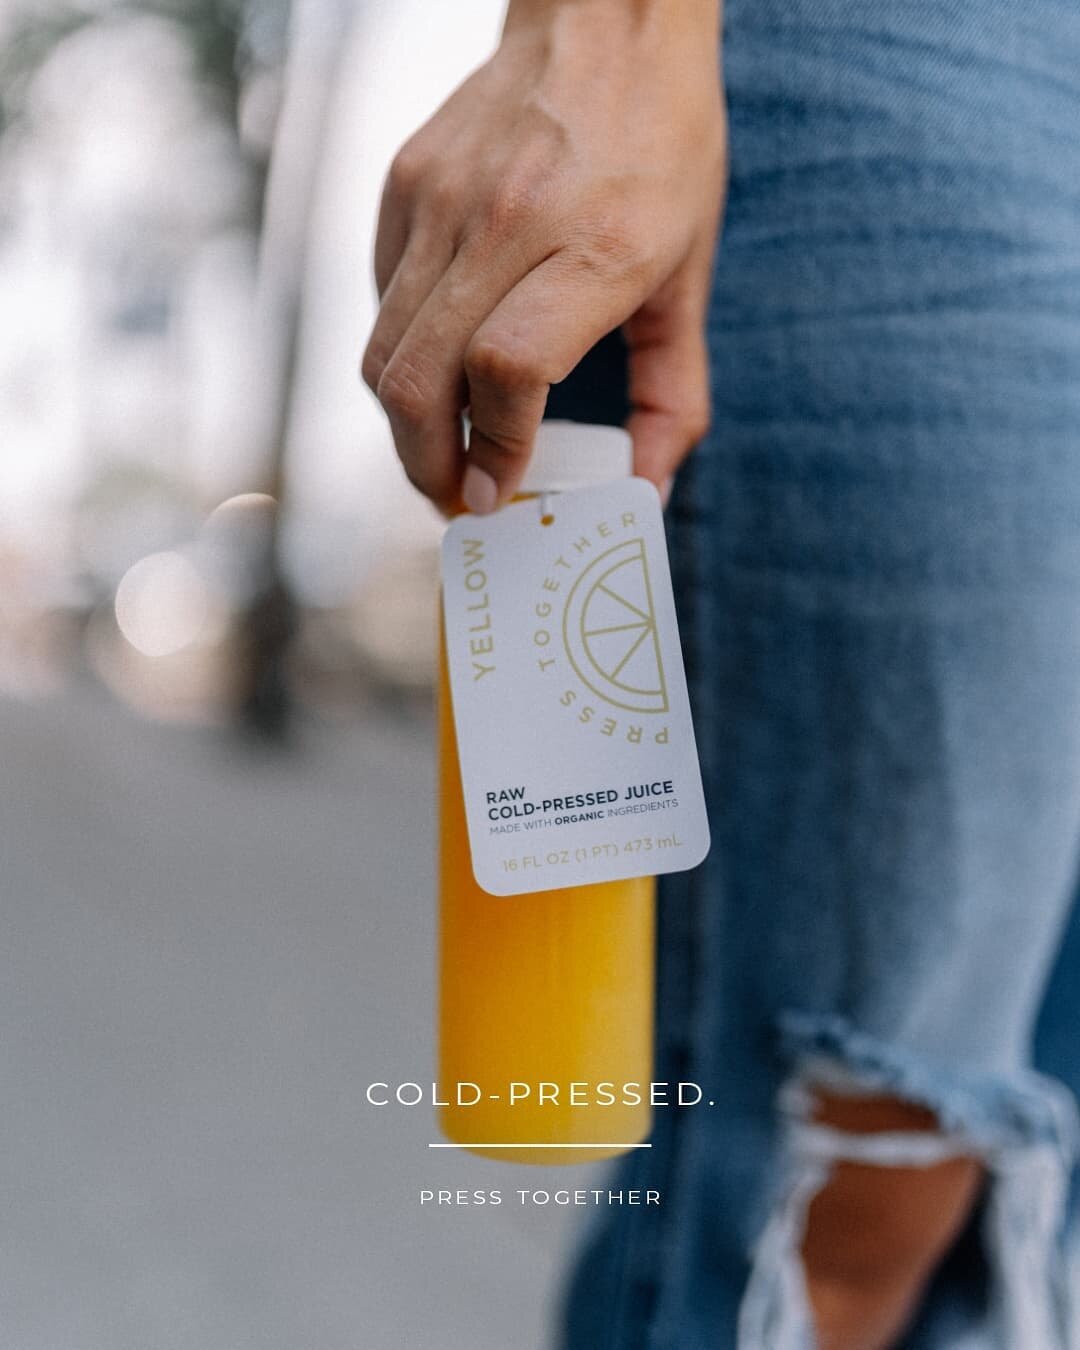 raw. organic. COLD-PRESSED
COLD-PRESSED is the process in which the juice is made. It means that the juice contains up to 5x the amount of nutrients of a glass of juice produced on a centrifugal juicer.